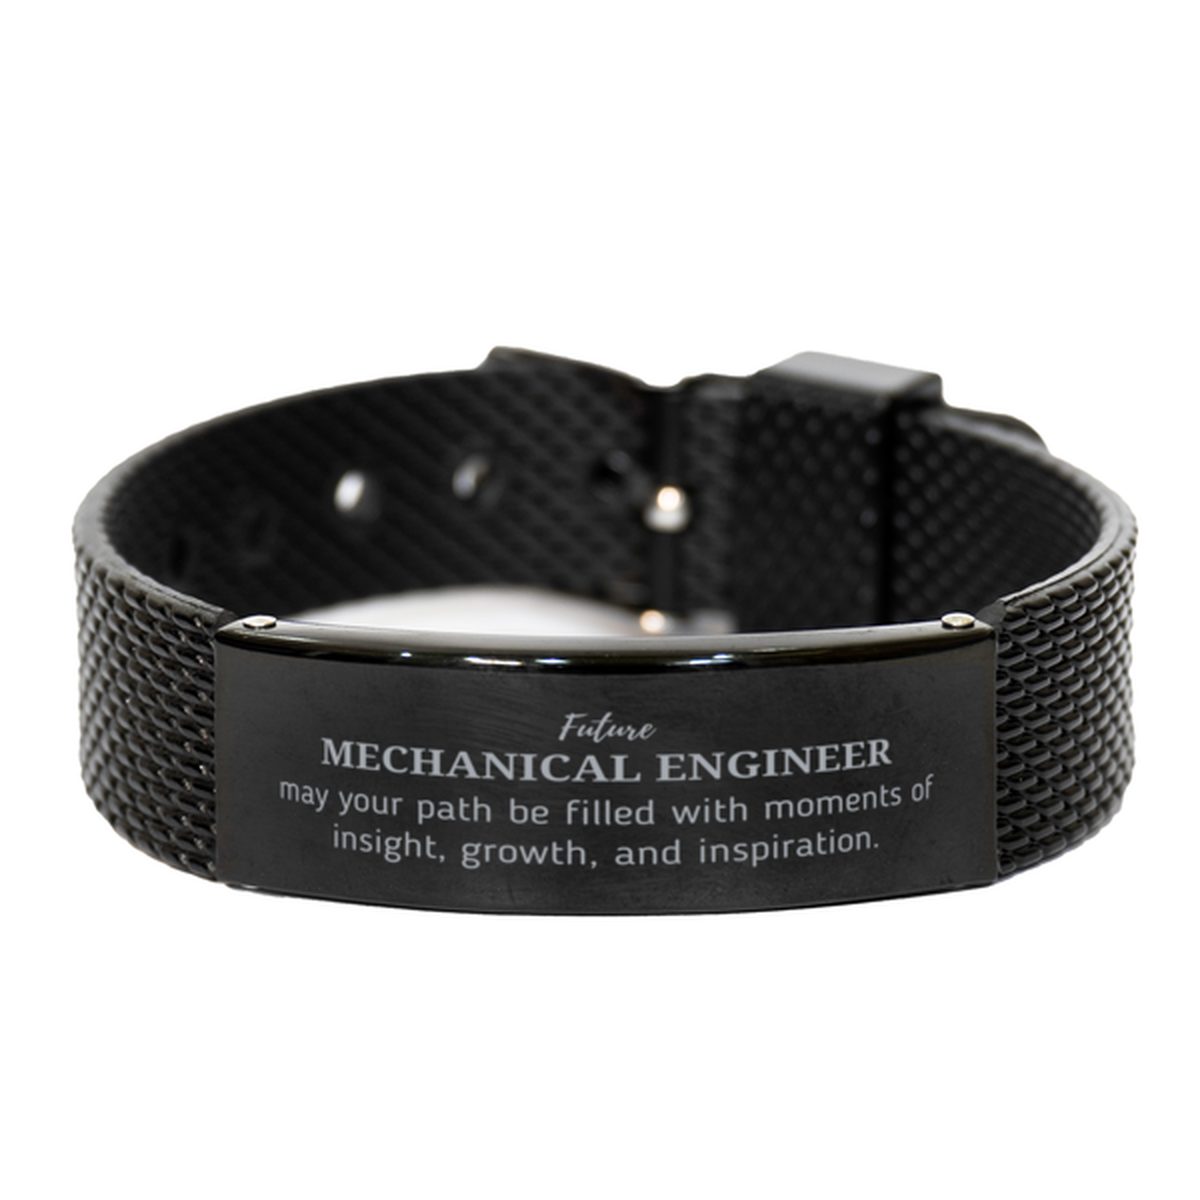 Future Mechanical Engineer Gifts, May your path be filled with moments of insight, Graduation Gifts for New Mechanical Engineer, Christmas Unique Black Shark Mesh Bracelet For Men, Women, Friends